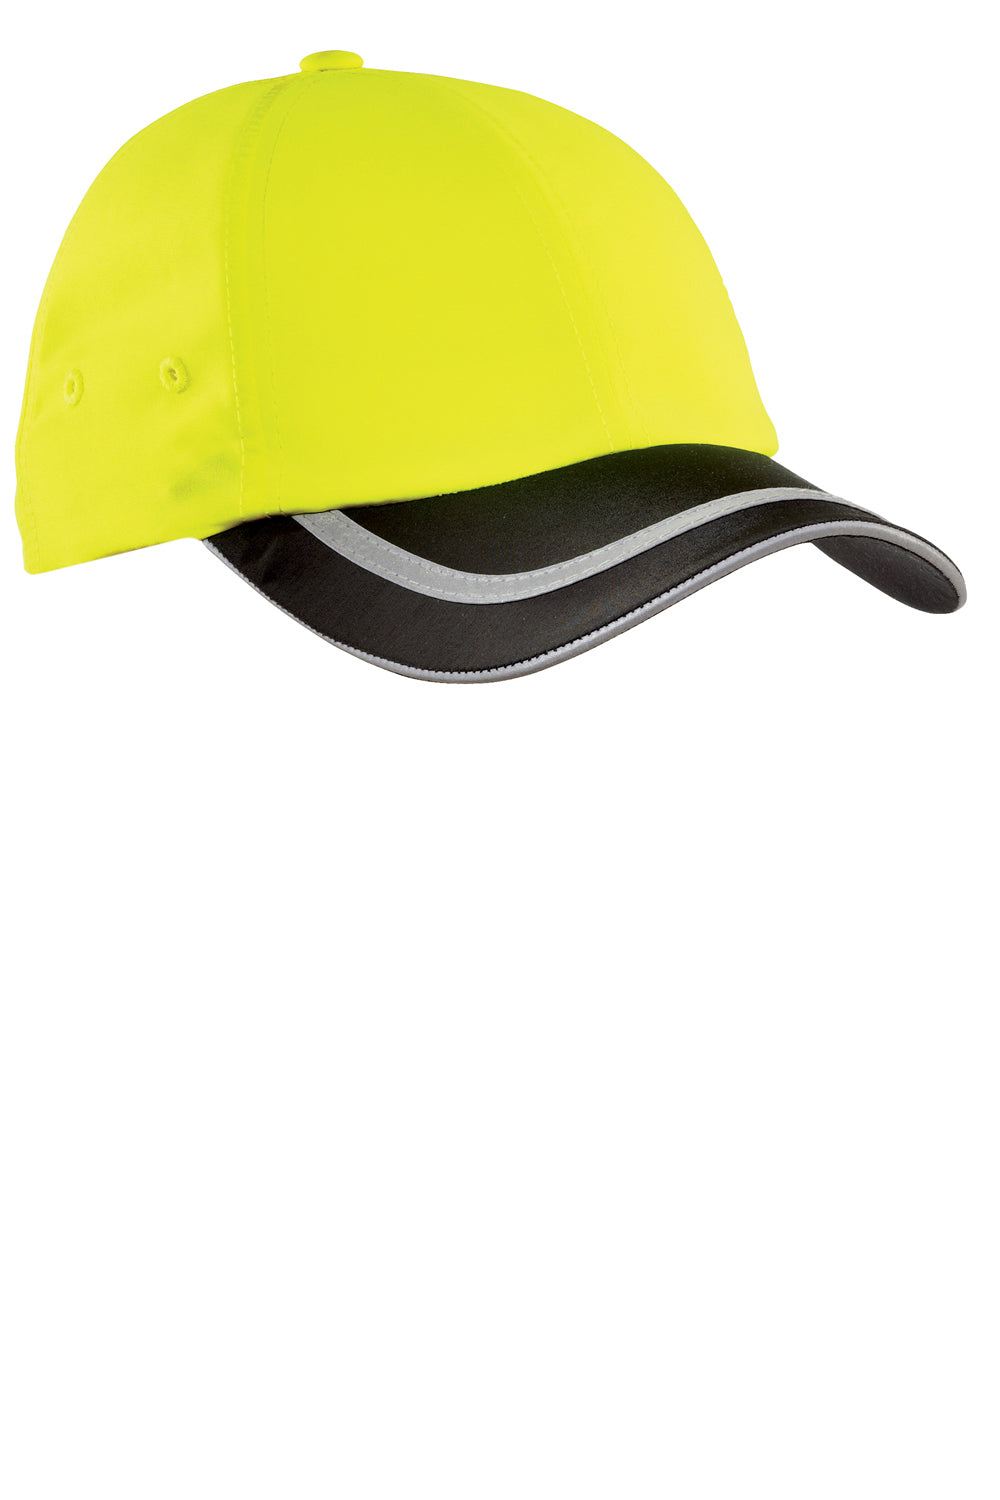 Port Authority C836 Enhanced Visibility Hat Safety Yellow/Black Front